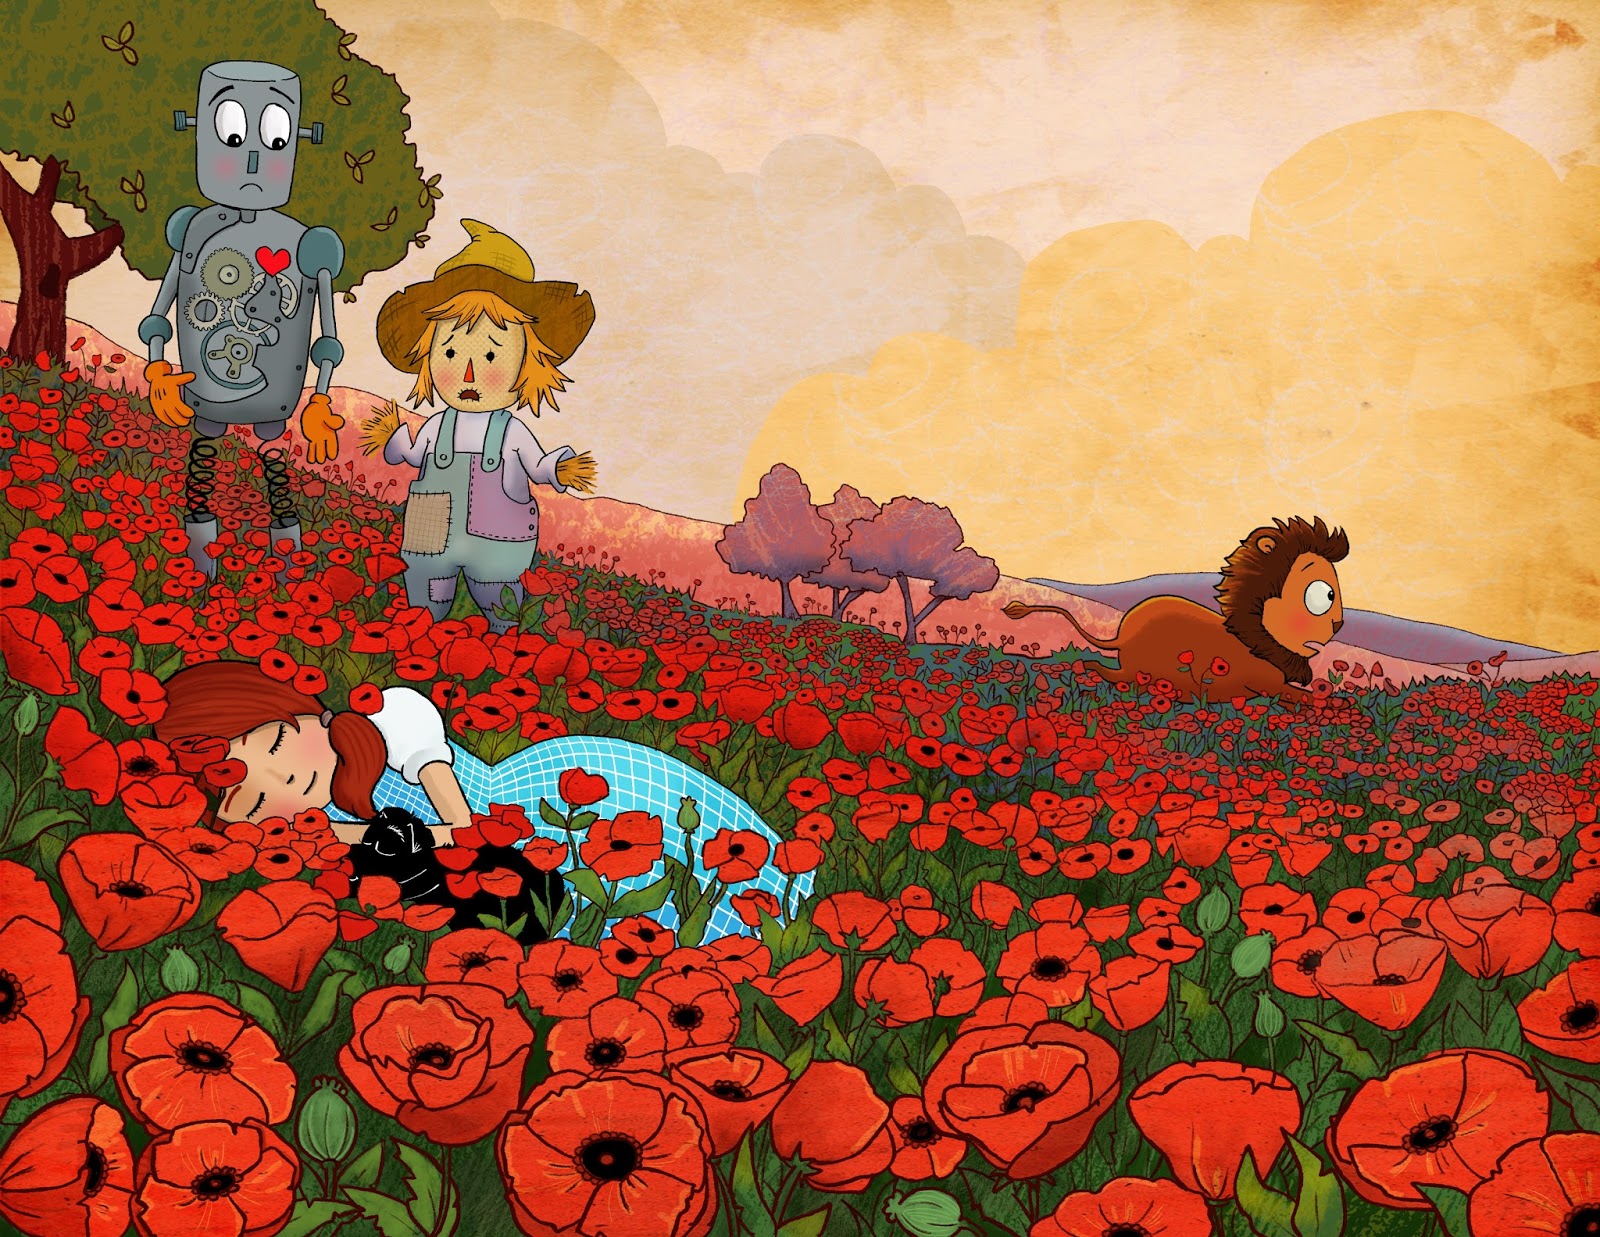 A mom with brushes: The deadly poppy field.